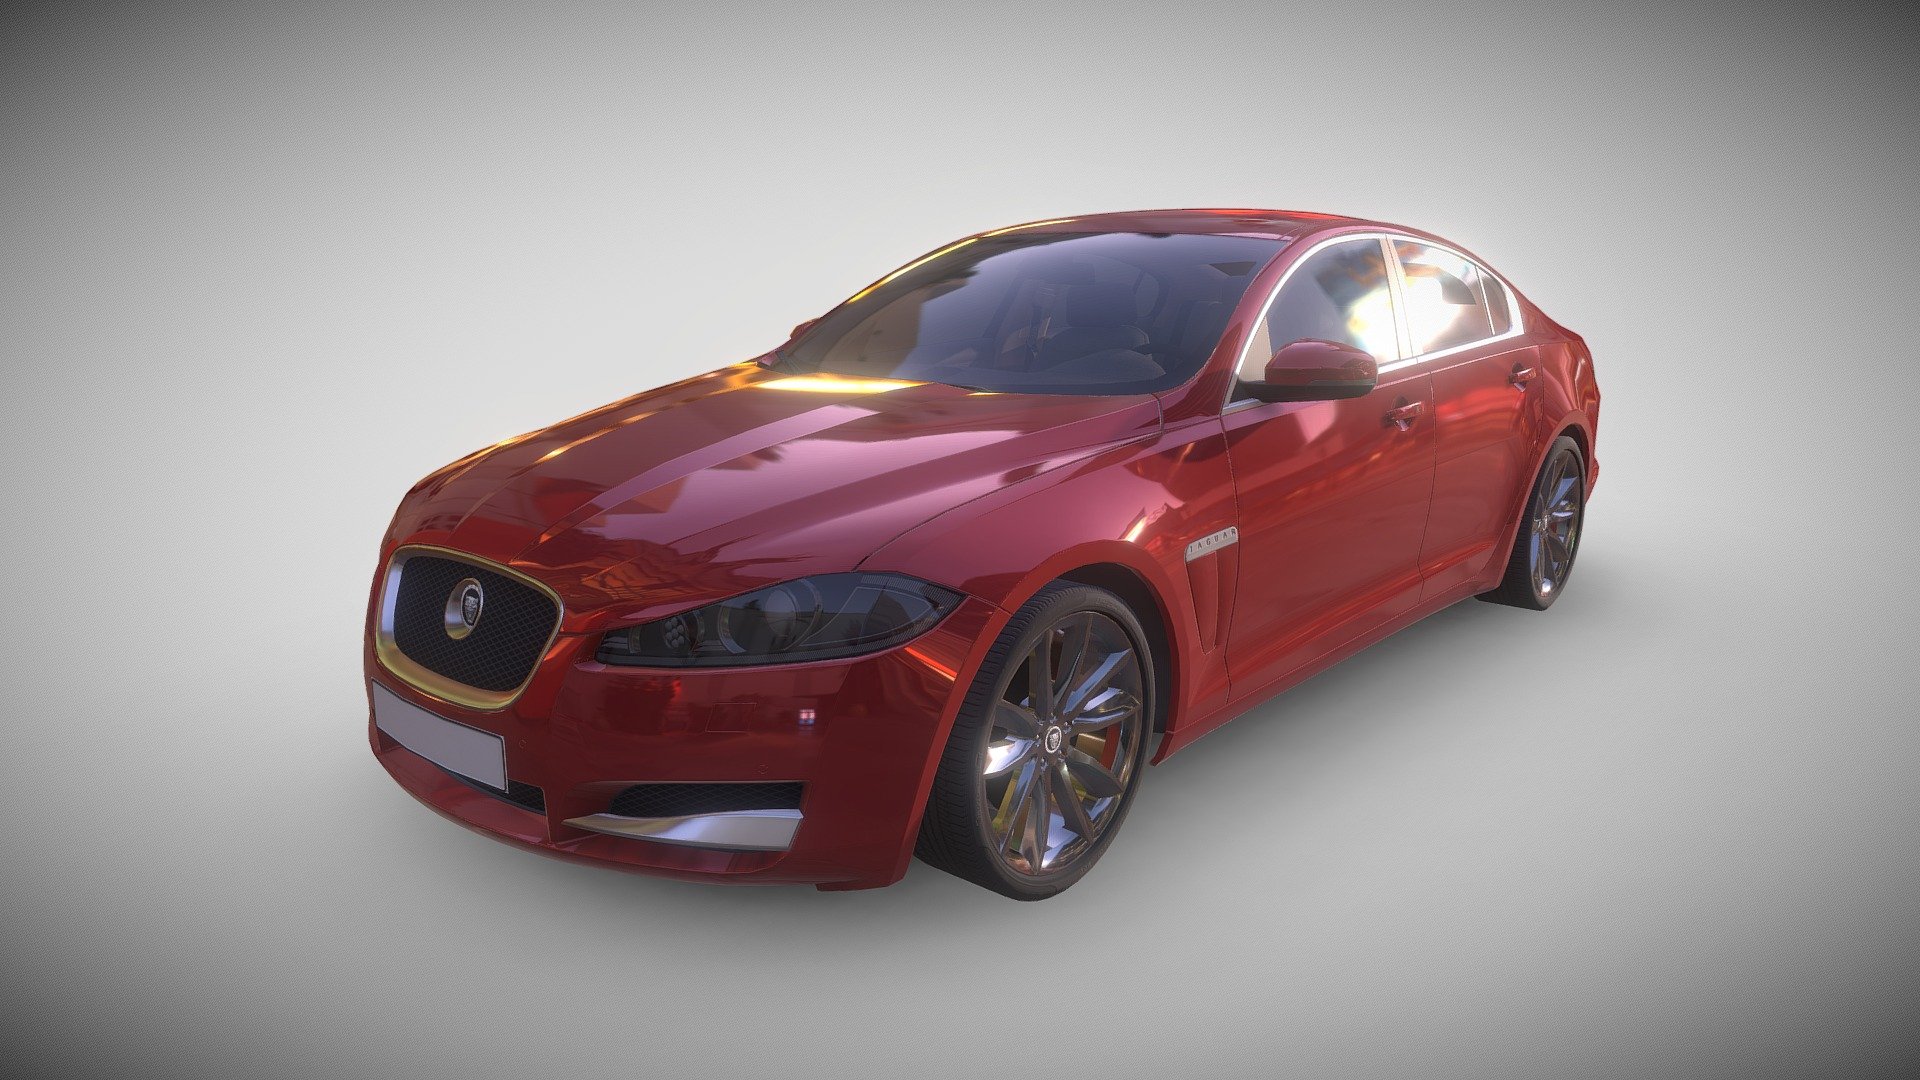 Jaguar Luxurycar Model,highpoly &amp; HQ Interior mesh. 
Software: 3DMax. 
This model has a realistic interior (with a seperate steering-wheel), seperate wheels (hinged at geometry centre), seperated calipers and high-res textures. Overall, it’s a great model for use on mobile applications/games and in XR (AR/VR) environments.
 - Jaguar Luxurycar Model - 3D model by sanfree 3d model